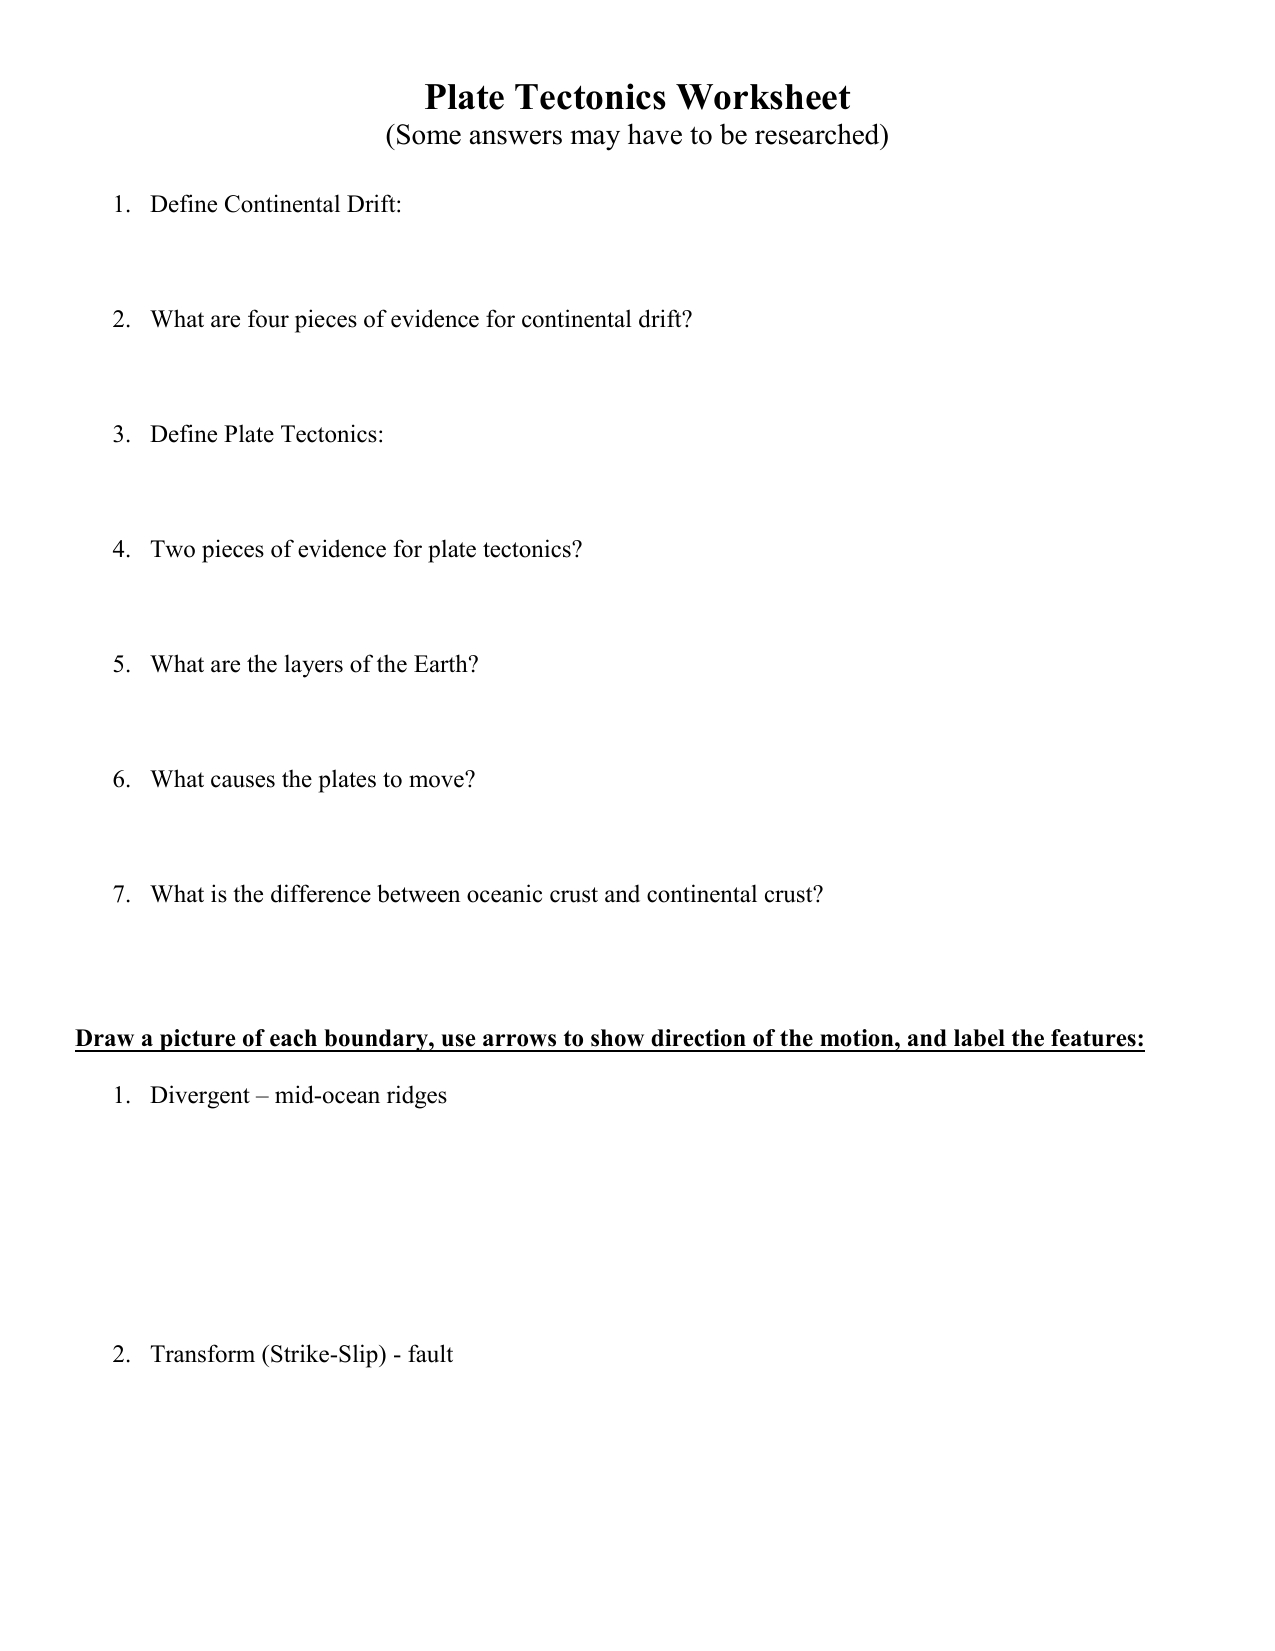 Plate Tectonics Review Worksheet Along With Plate Tectonics Review Worksheet